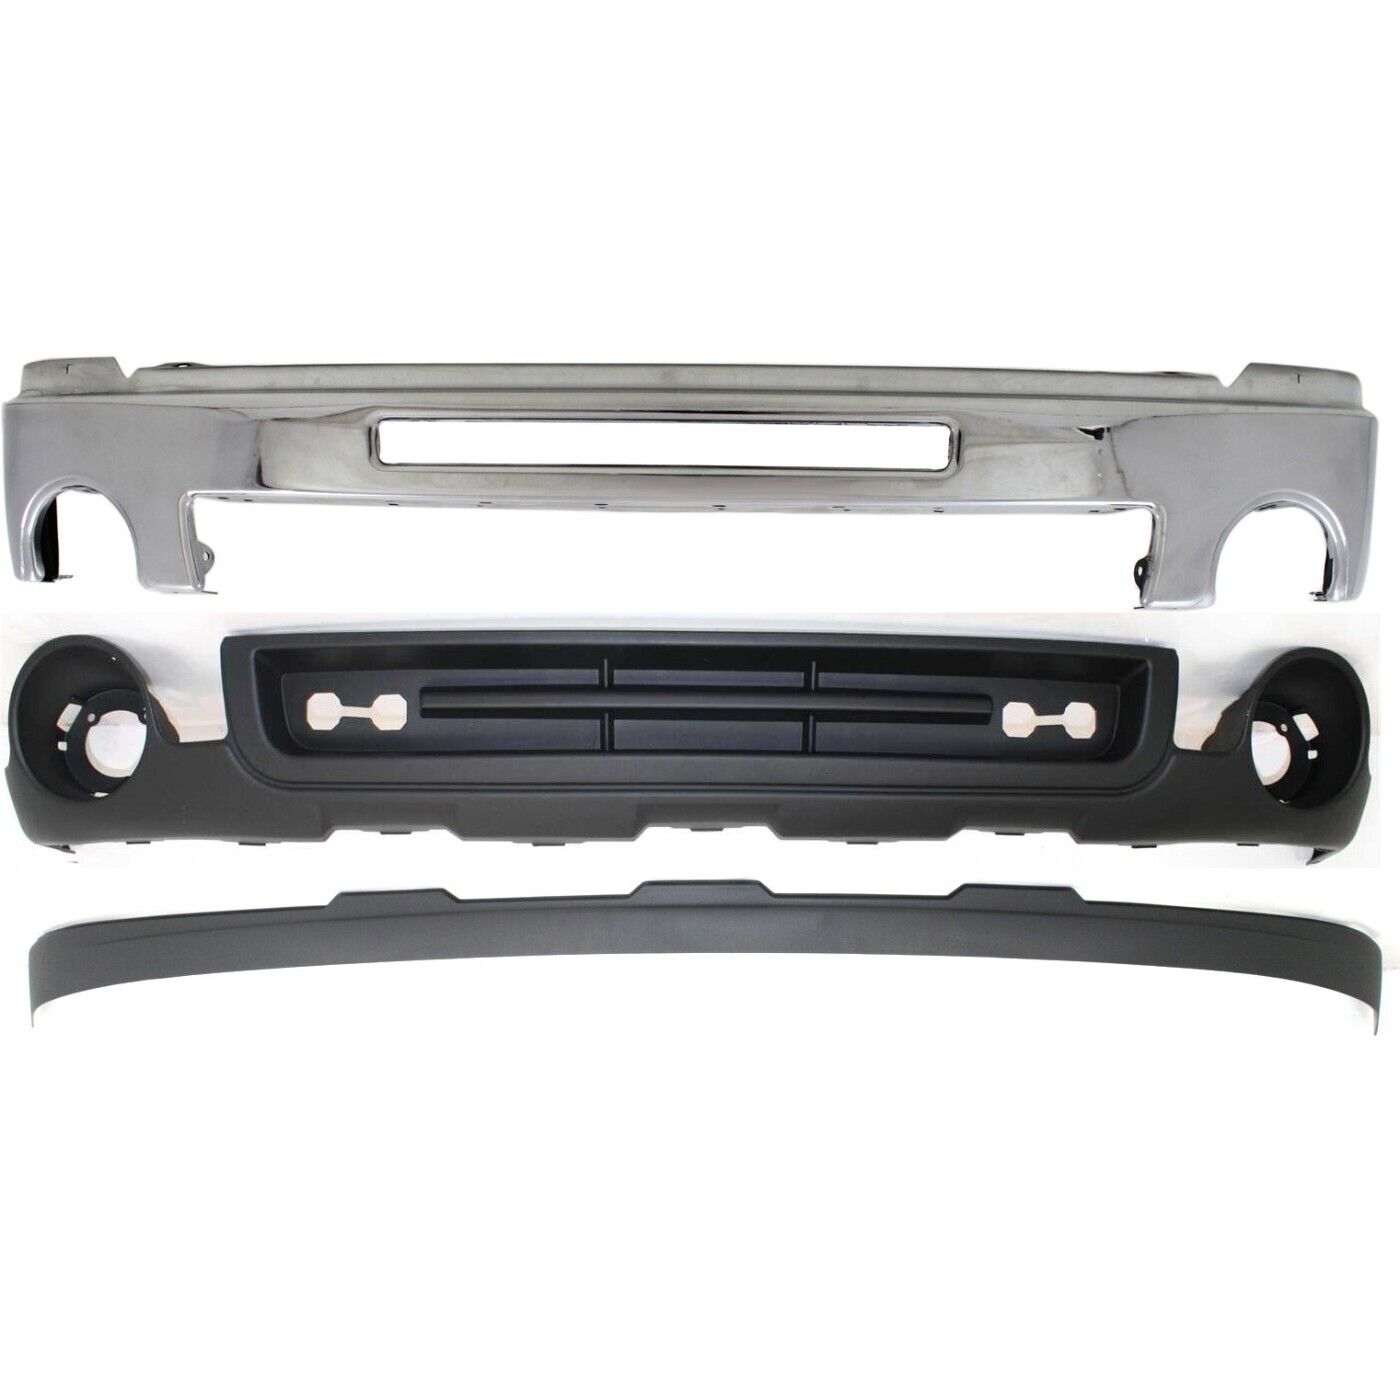 Bumper Kit For 2007-2013 GMC Sierra 1500 with Towing Package Front with Valances